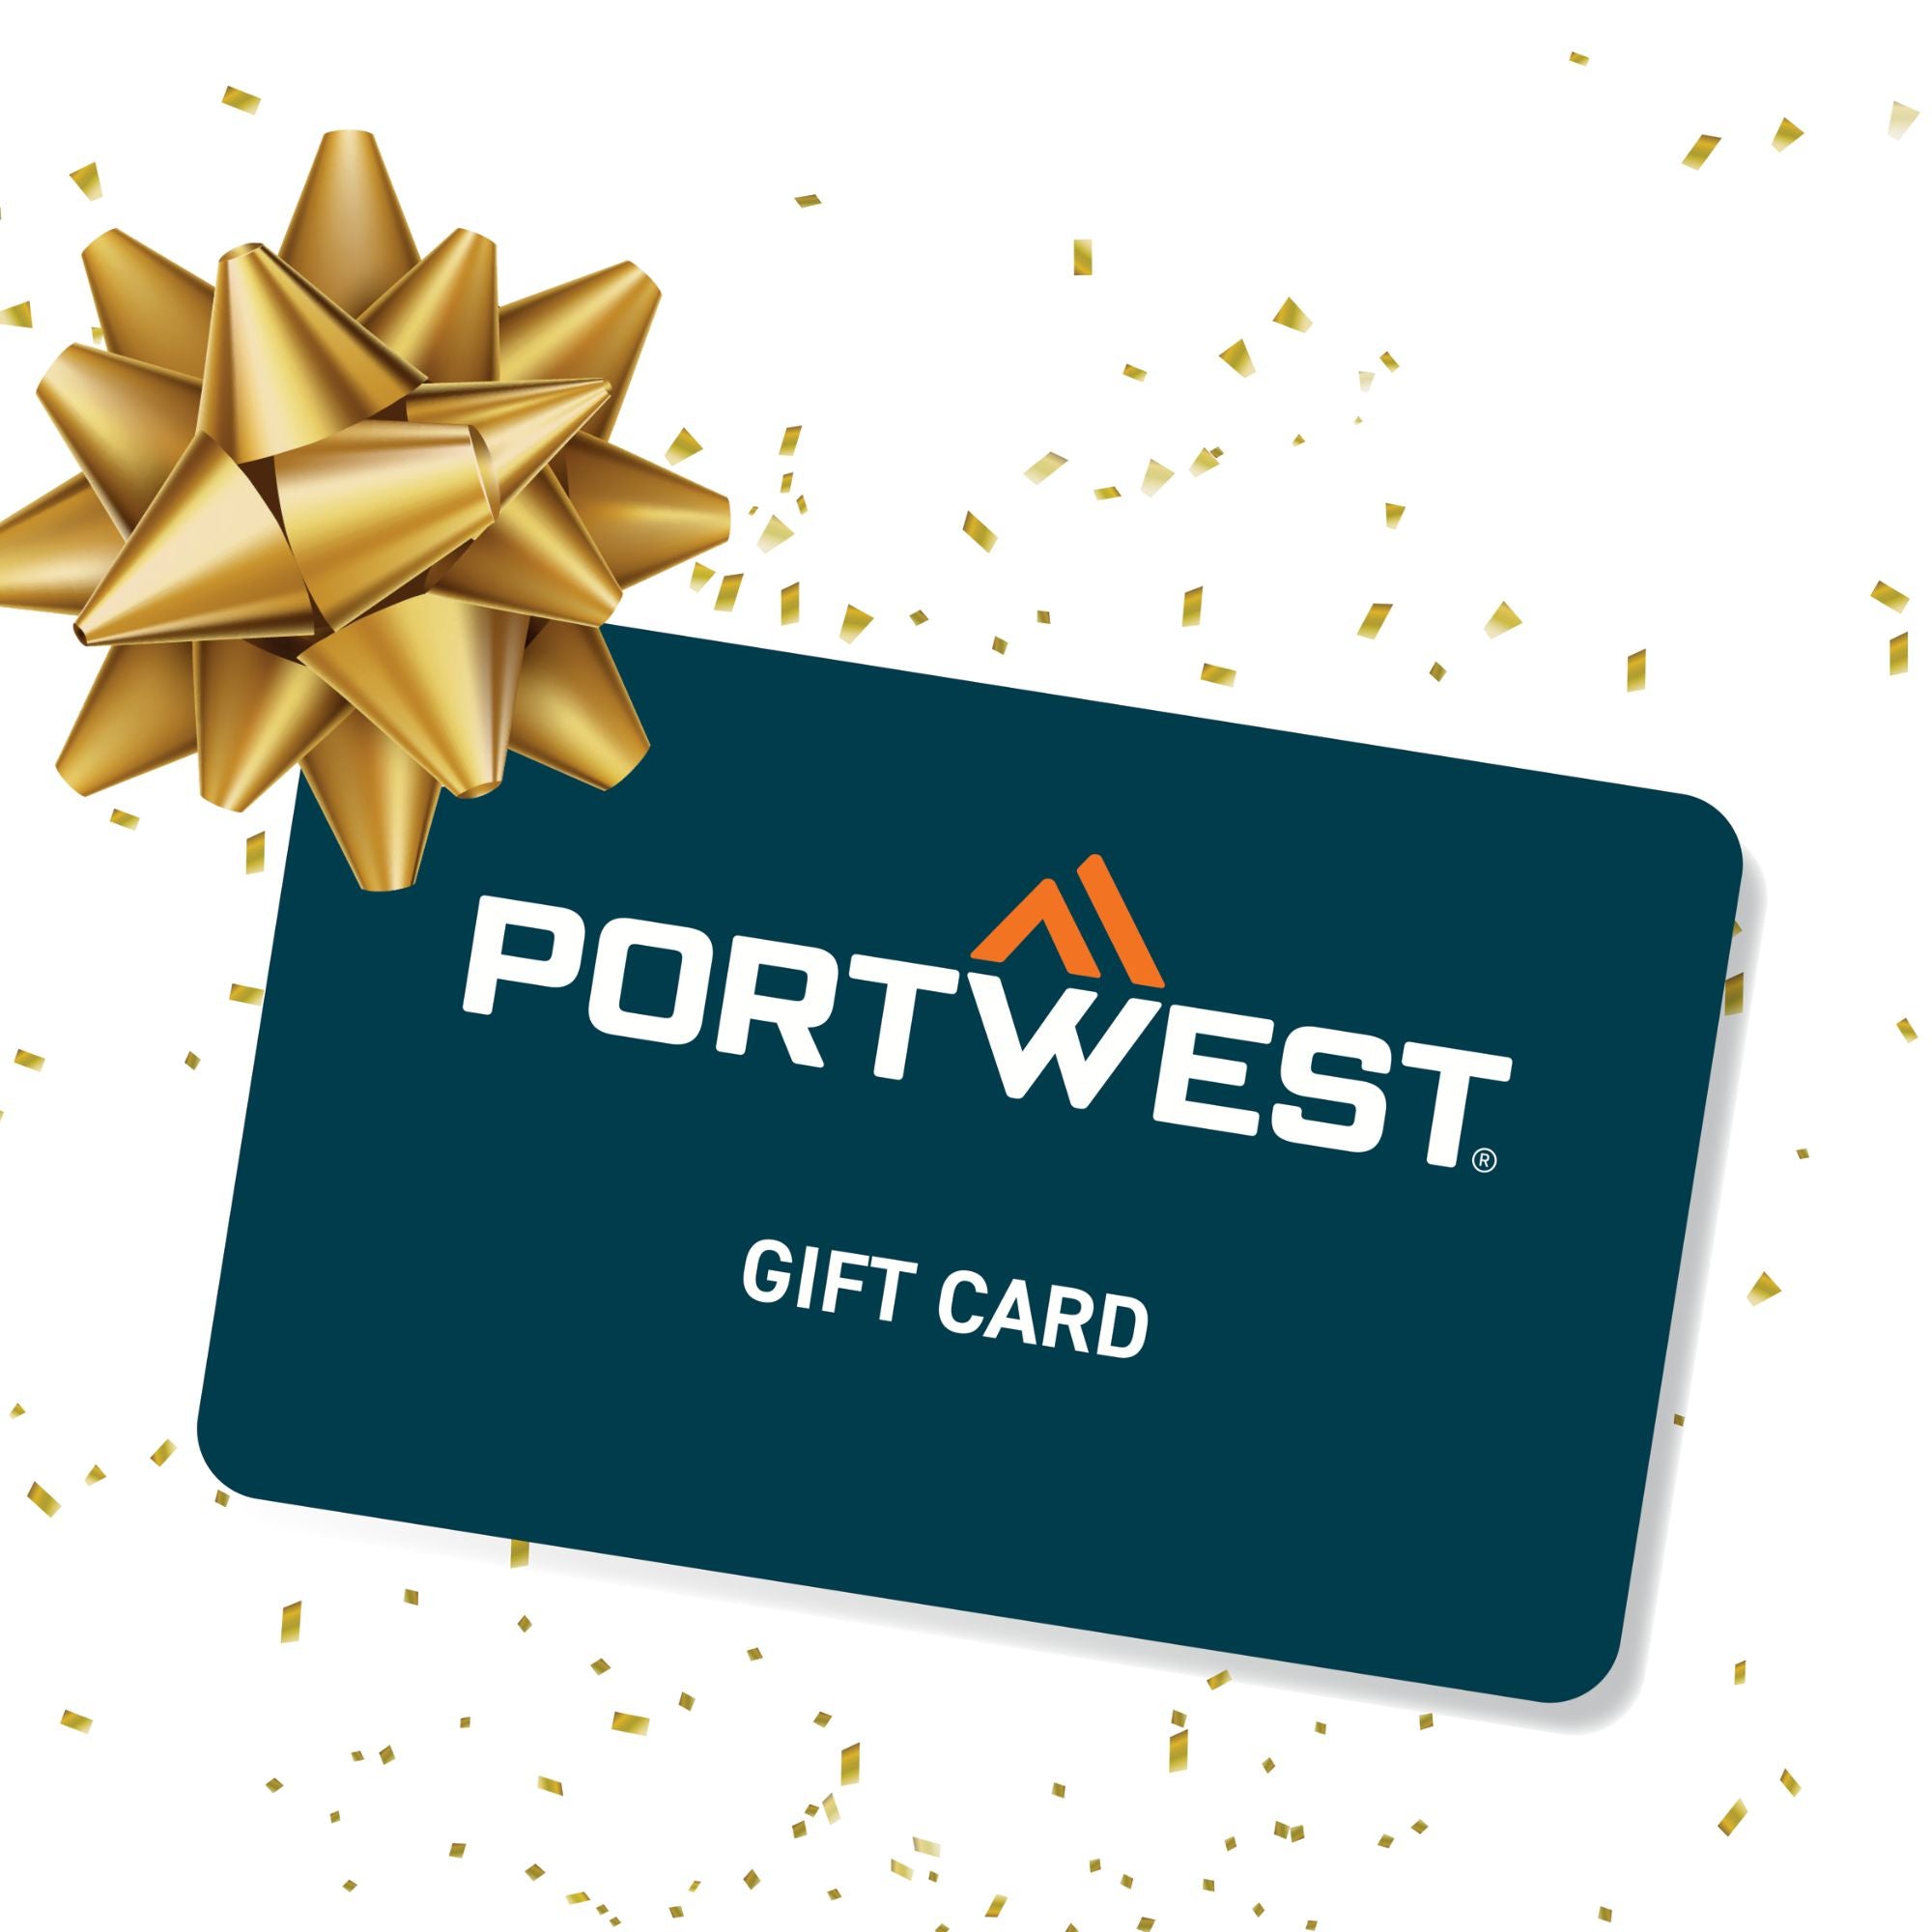 Portwest Ireland Gift Card - For Instore Use | Portwest | Portwest - The Outdoor Shop